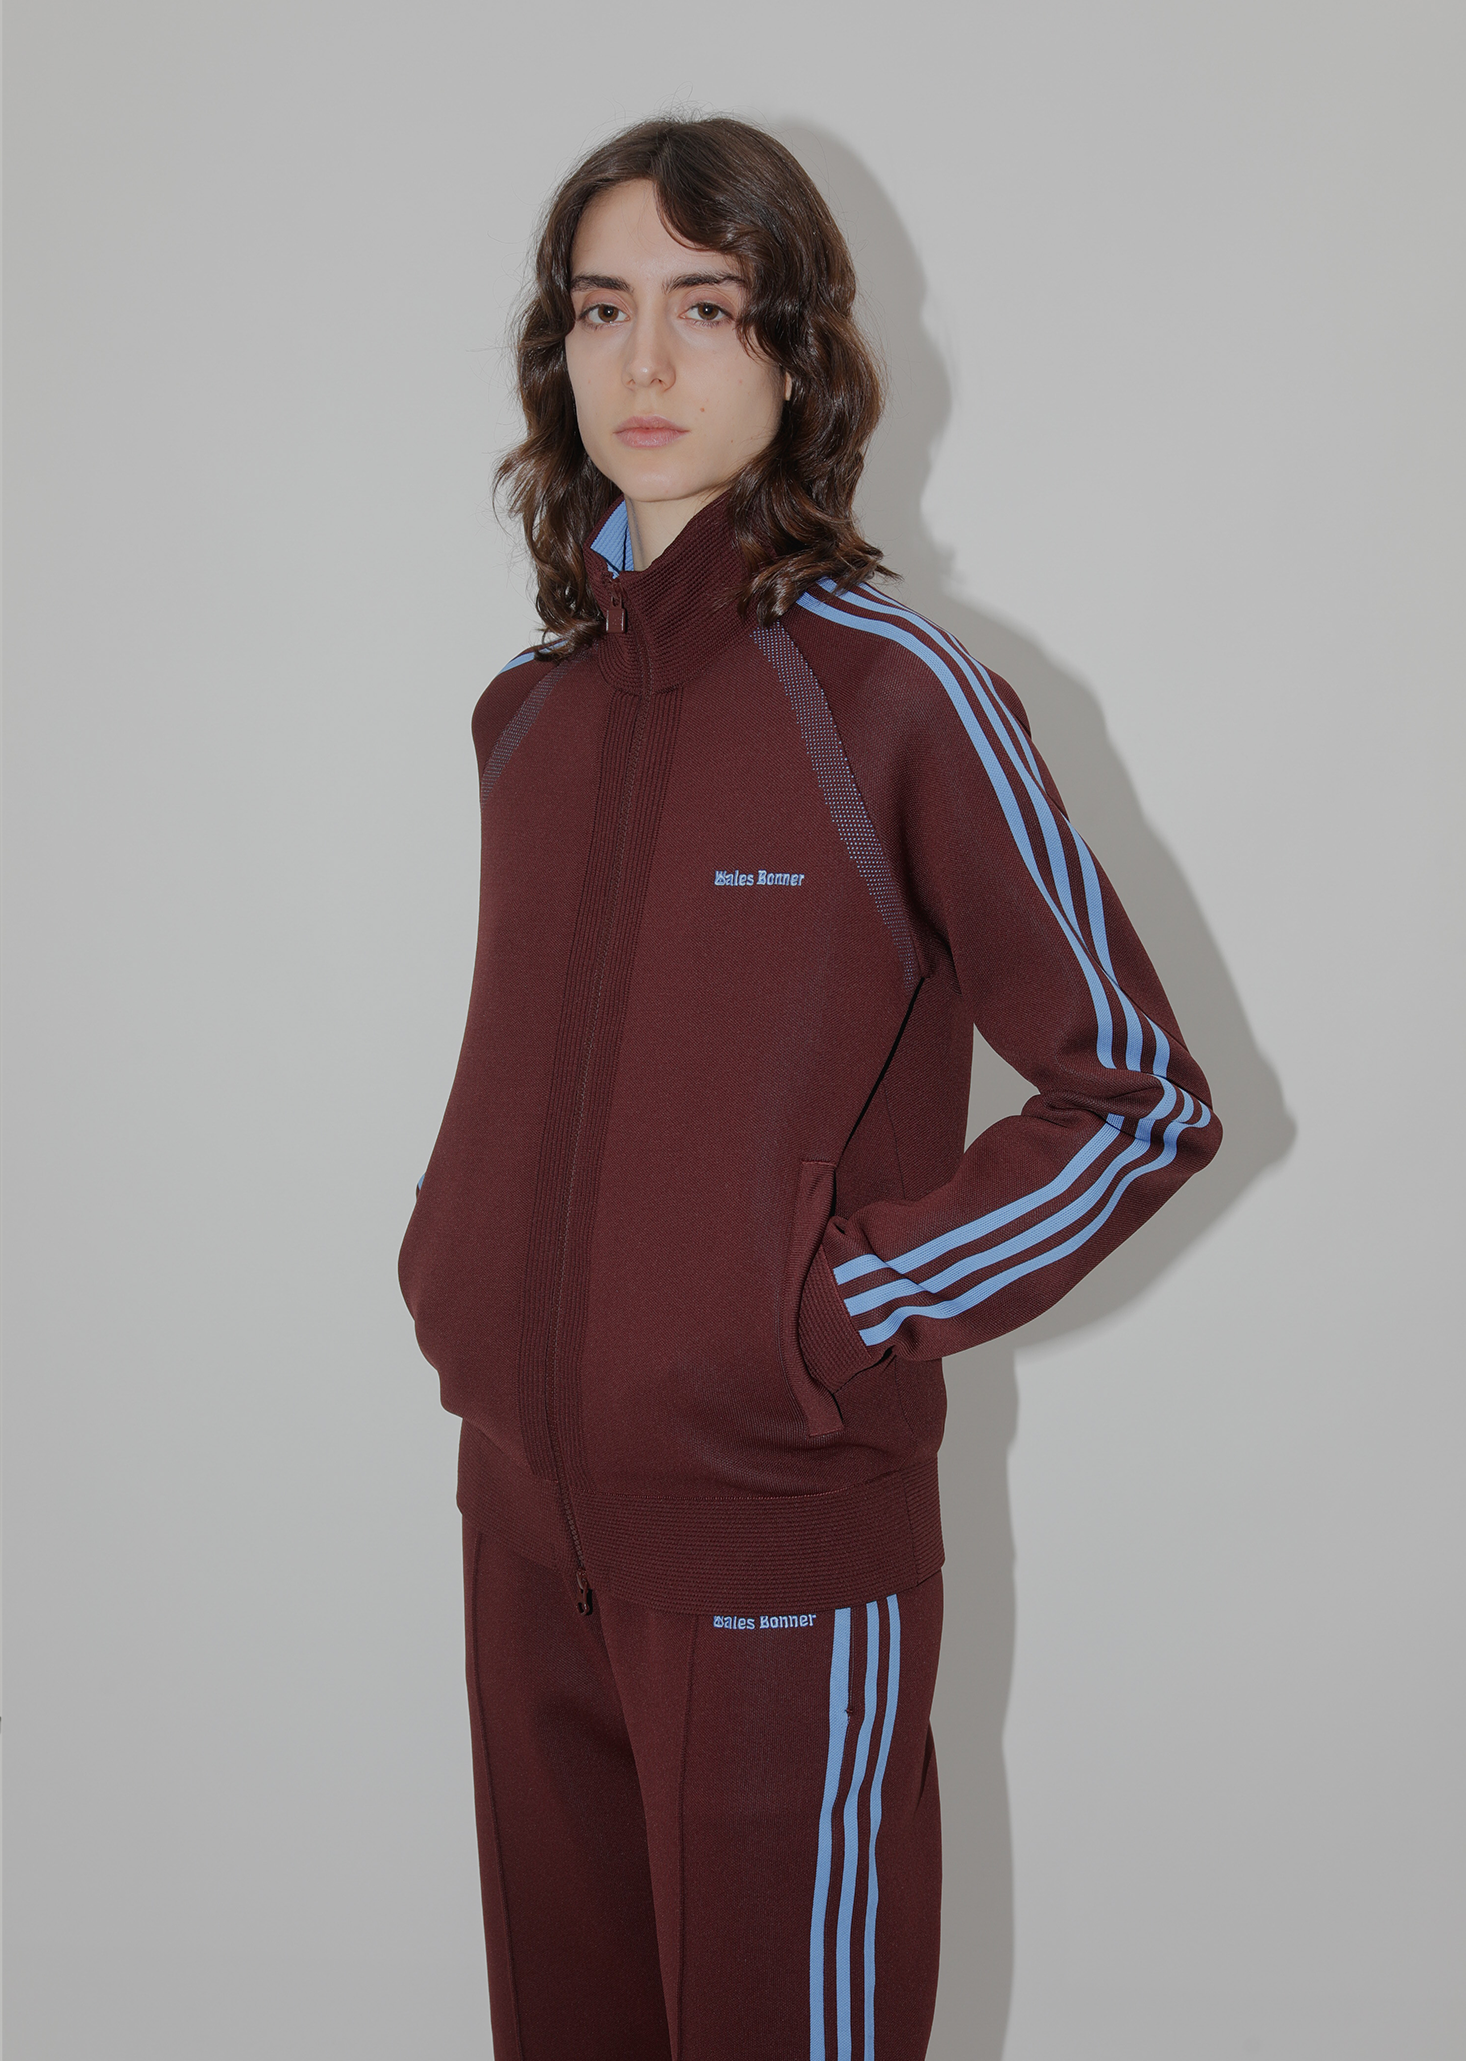 adidas Originals by Wales Bonner Knit Track Jacket (Mystery Brown